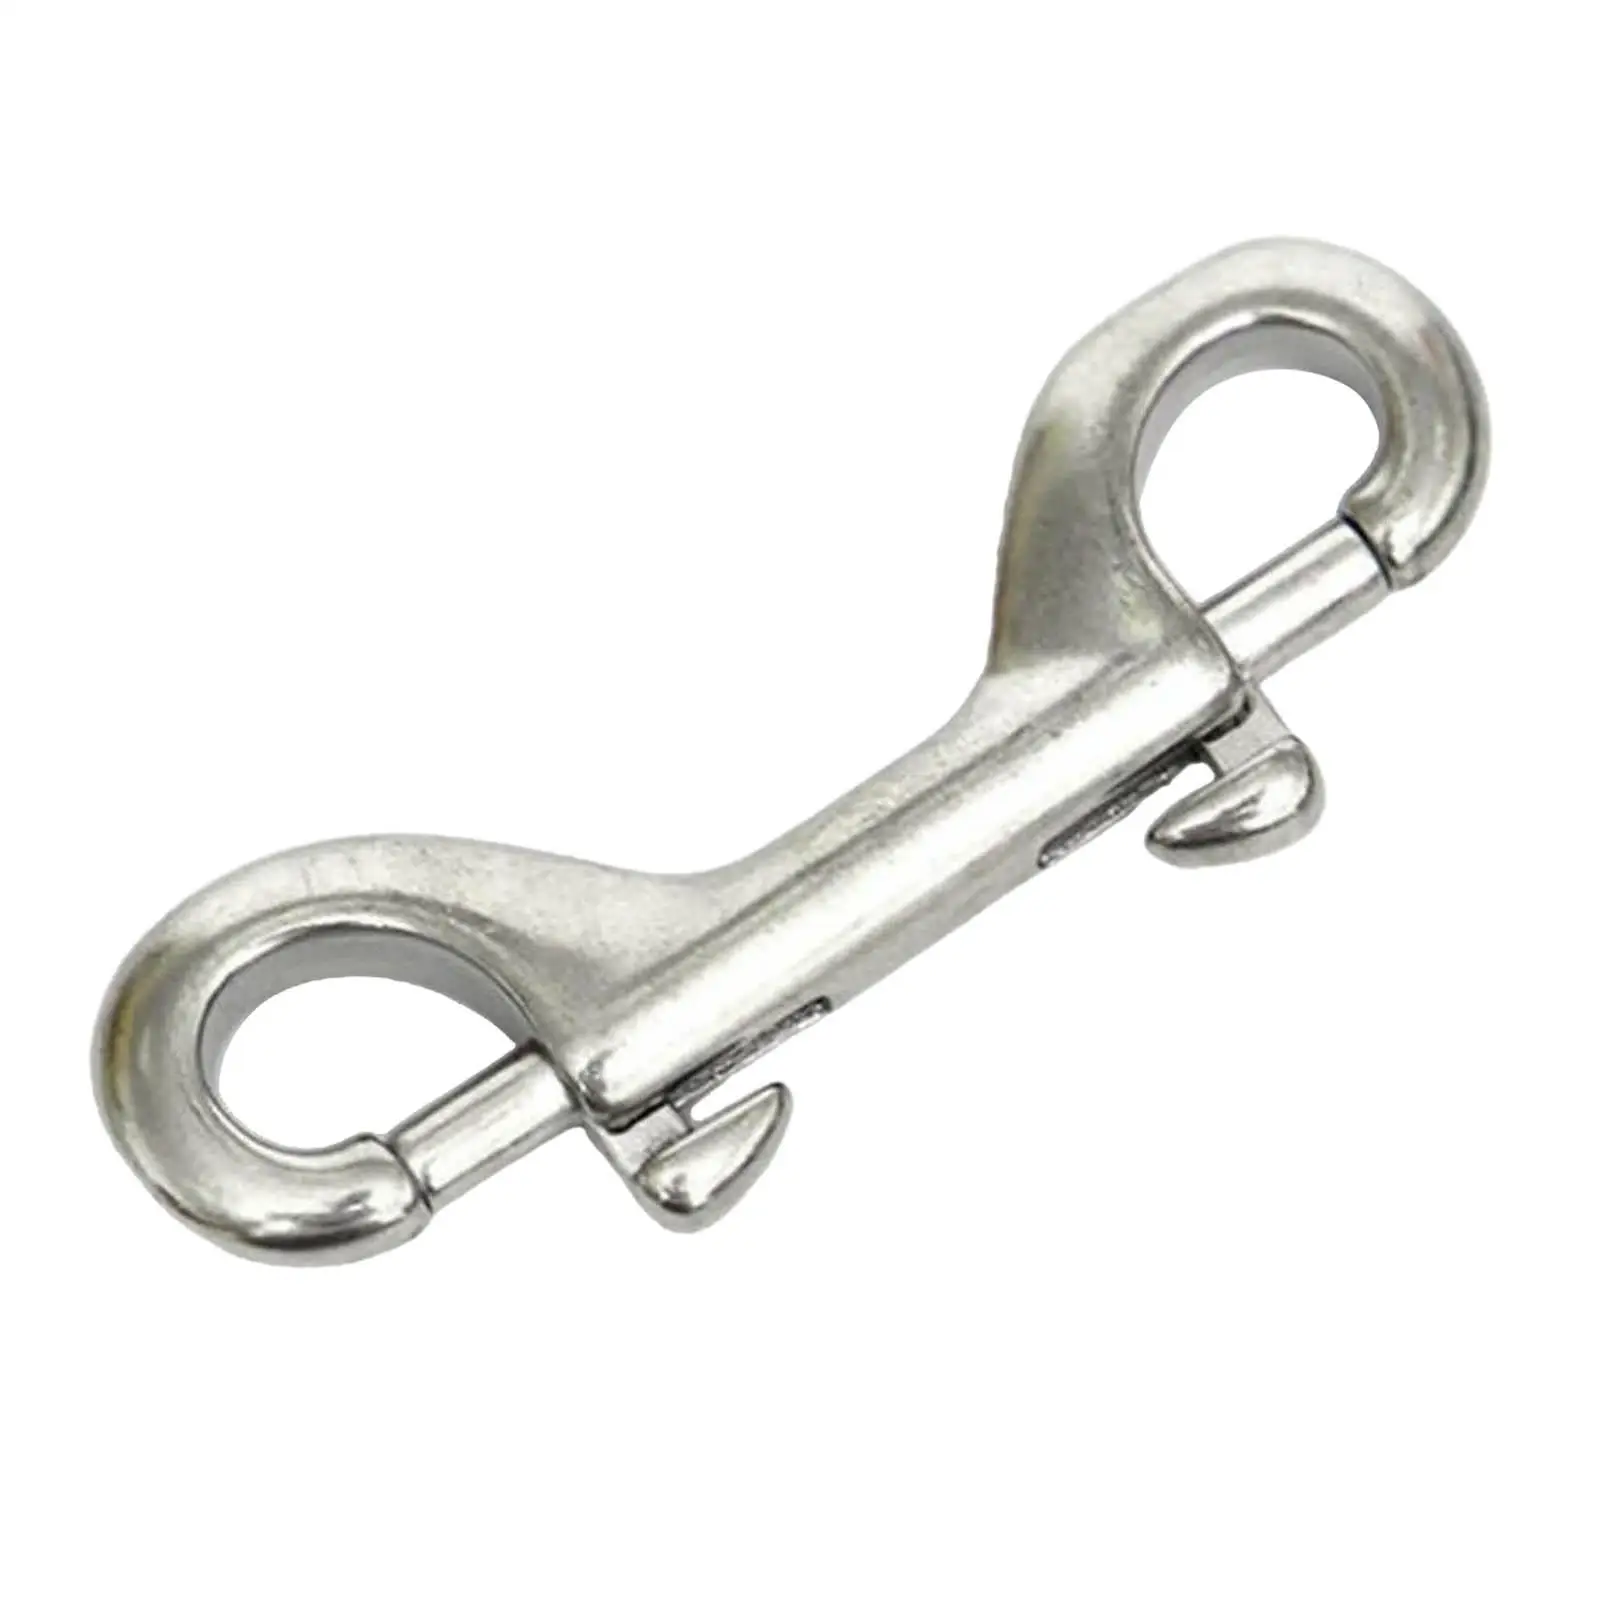 Double Ended Hook Diving Snap Bolt Clip Marine Grade for Key Chain